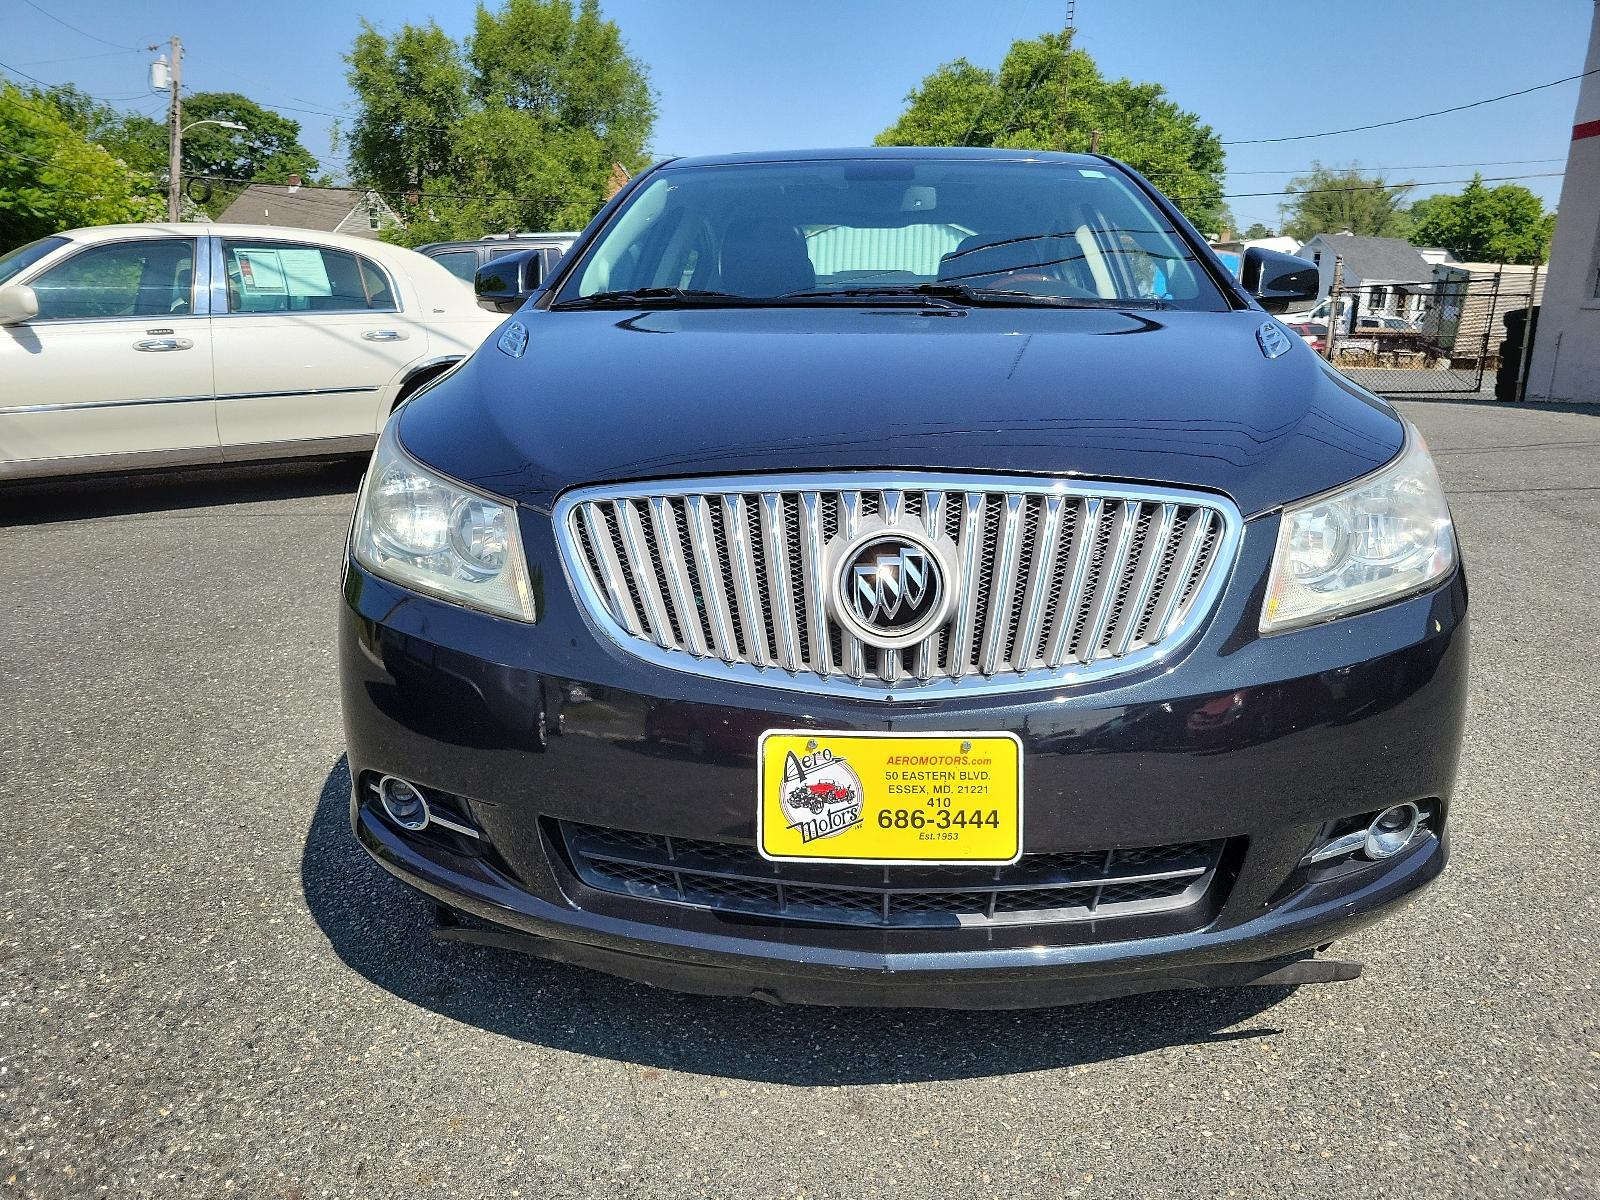 2011 Carbon Black Metallic - GAR /Ebony - AFH Buick LaCrosse CXS (1G4GE5ED8BF) with an ENGINE, 3.6L VARIABLE VALVE TIMING V6 WITH SIDI (SPARK IGNITION DIRECT INJECTION), DOHC engine, located at 50 Eastern Blvd., Essex, MD, 21221, (410) 686-3444, 39.304367, -76.484947 - <p>Introduce yourself to our stunning 2011 Buick LaCrosse CXS Sedan, proudly presented in Carbon Black Metallic. Powered by a 3.6 Liter V6 that boasts 280hp connected to a smooth-shifting 6 Speed Automatic transmission. This Front Wheel Drive LaCrosse has a flowing aerodynamic design, tight suspensi - Photo #1